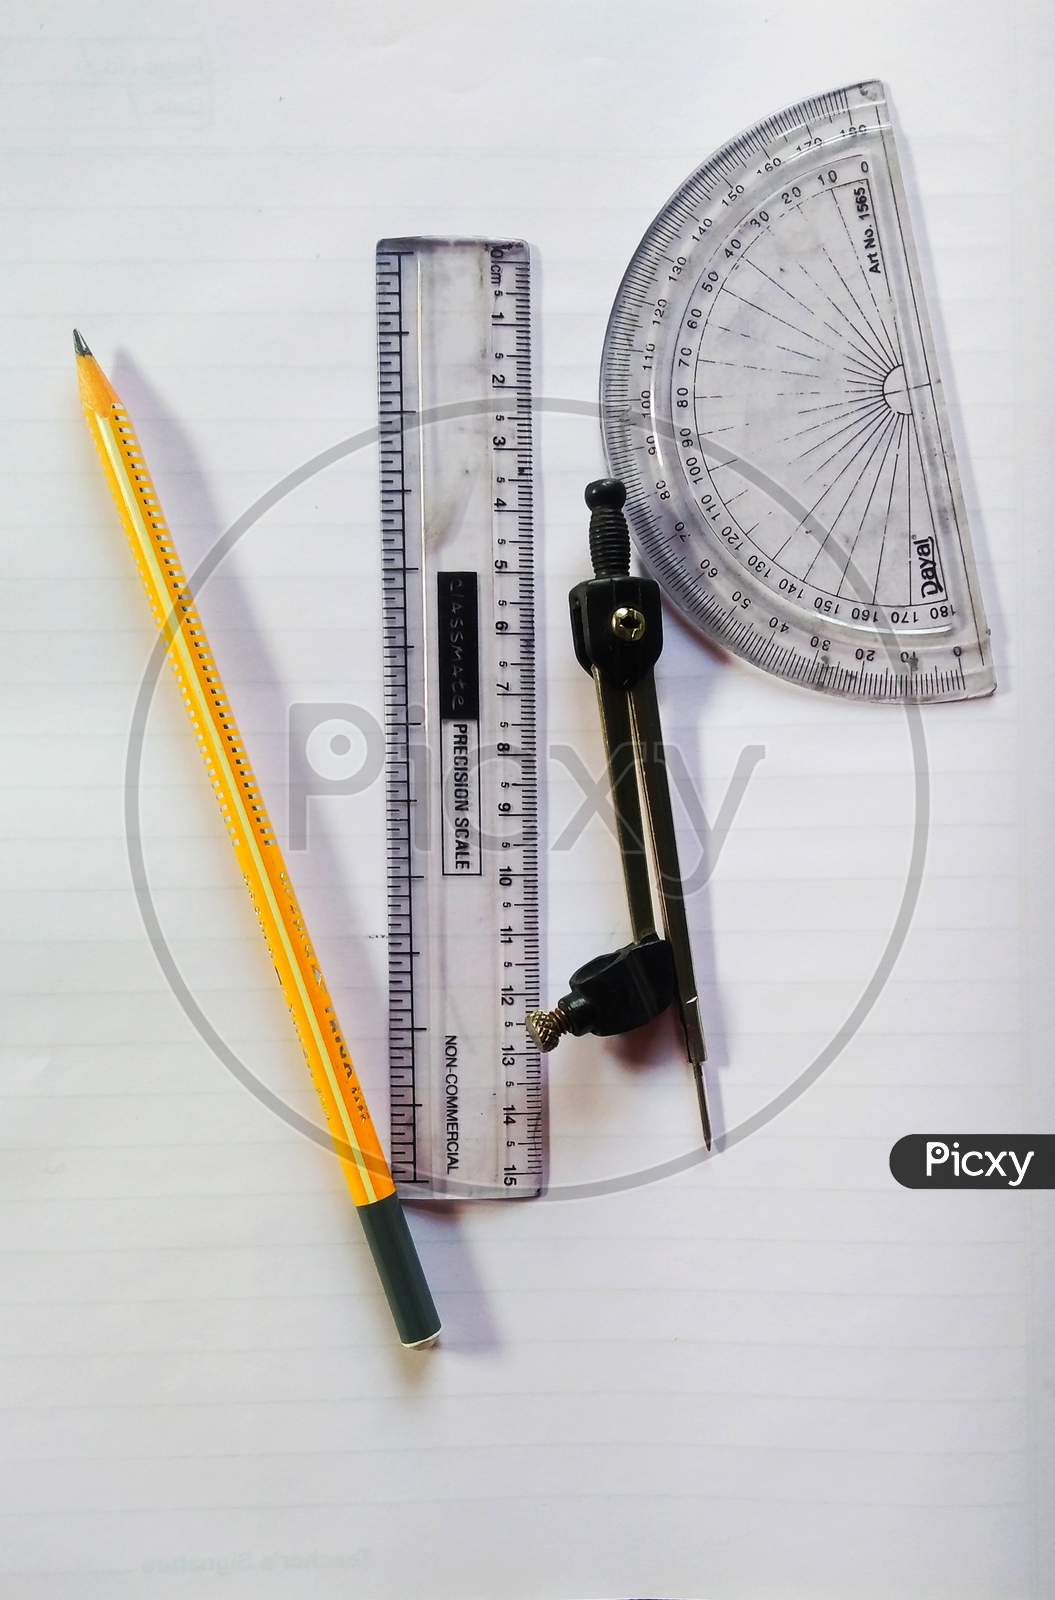 Geometrical instrument with ruler, pencil, metallic compass